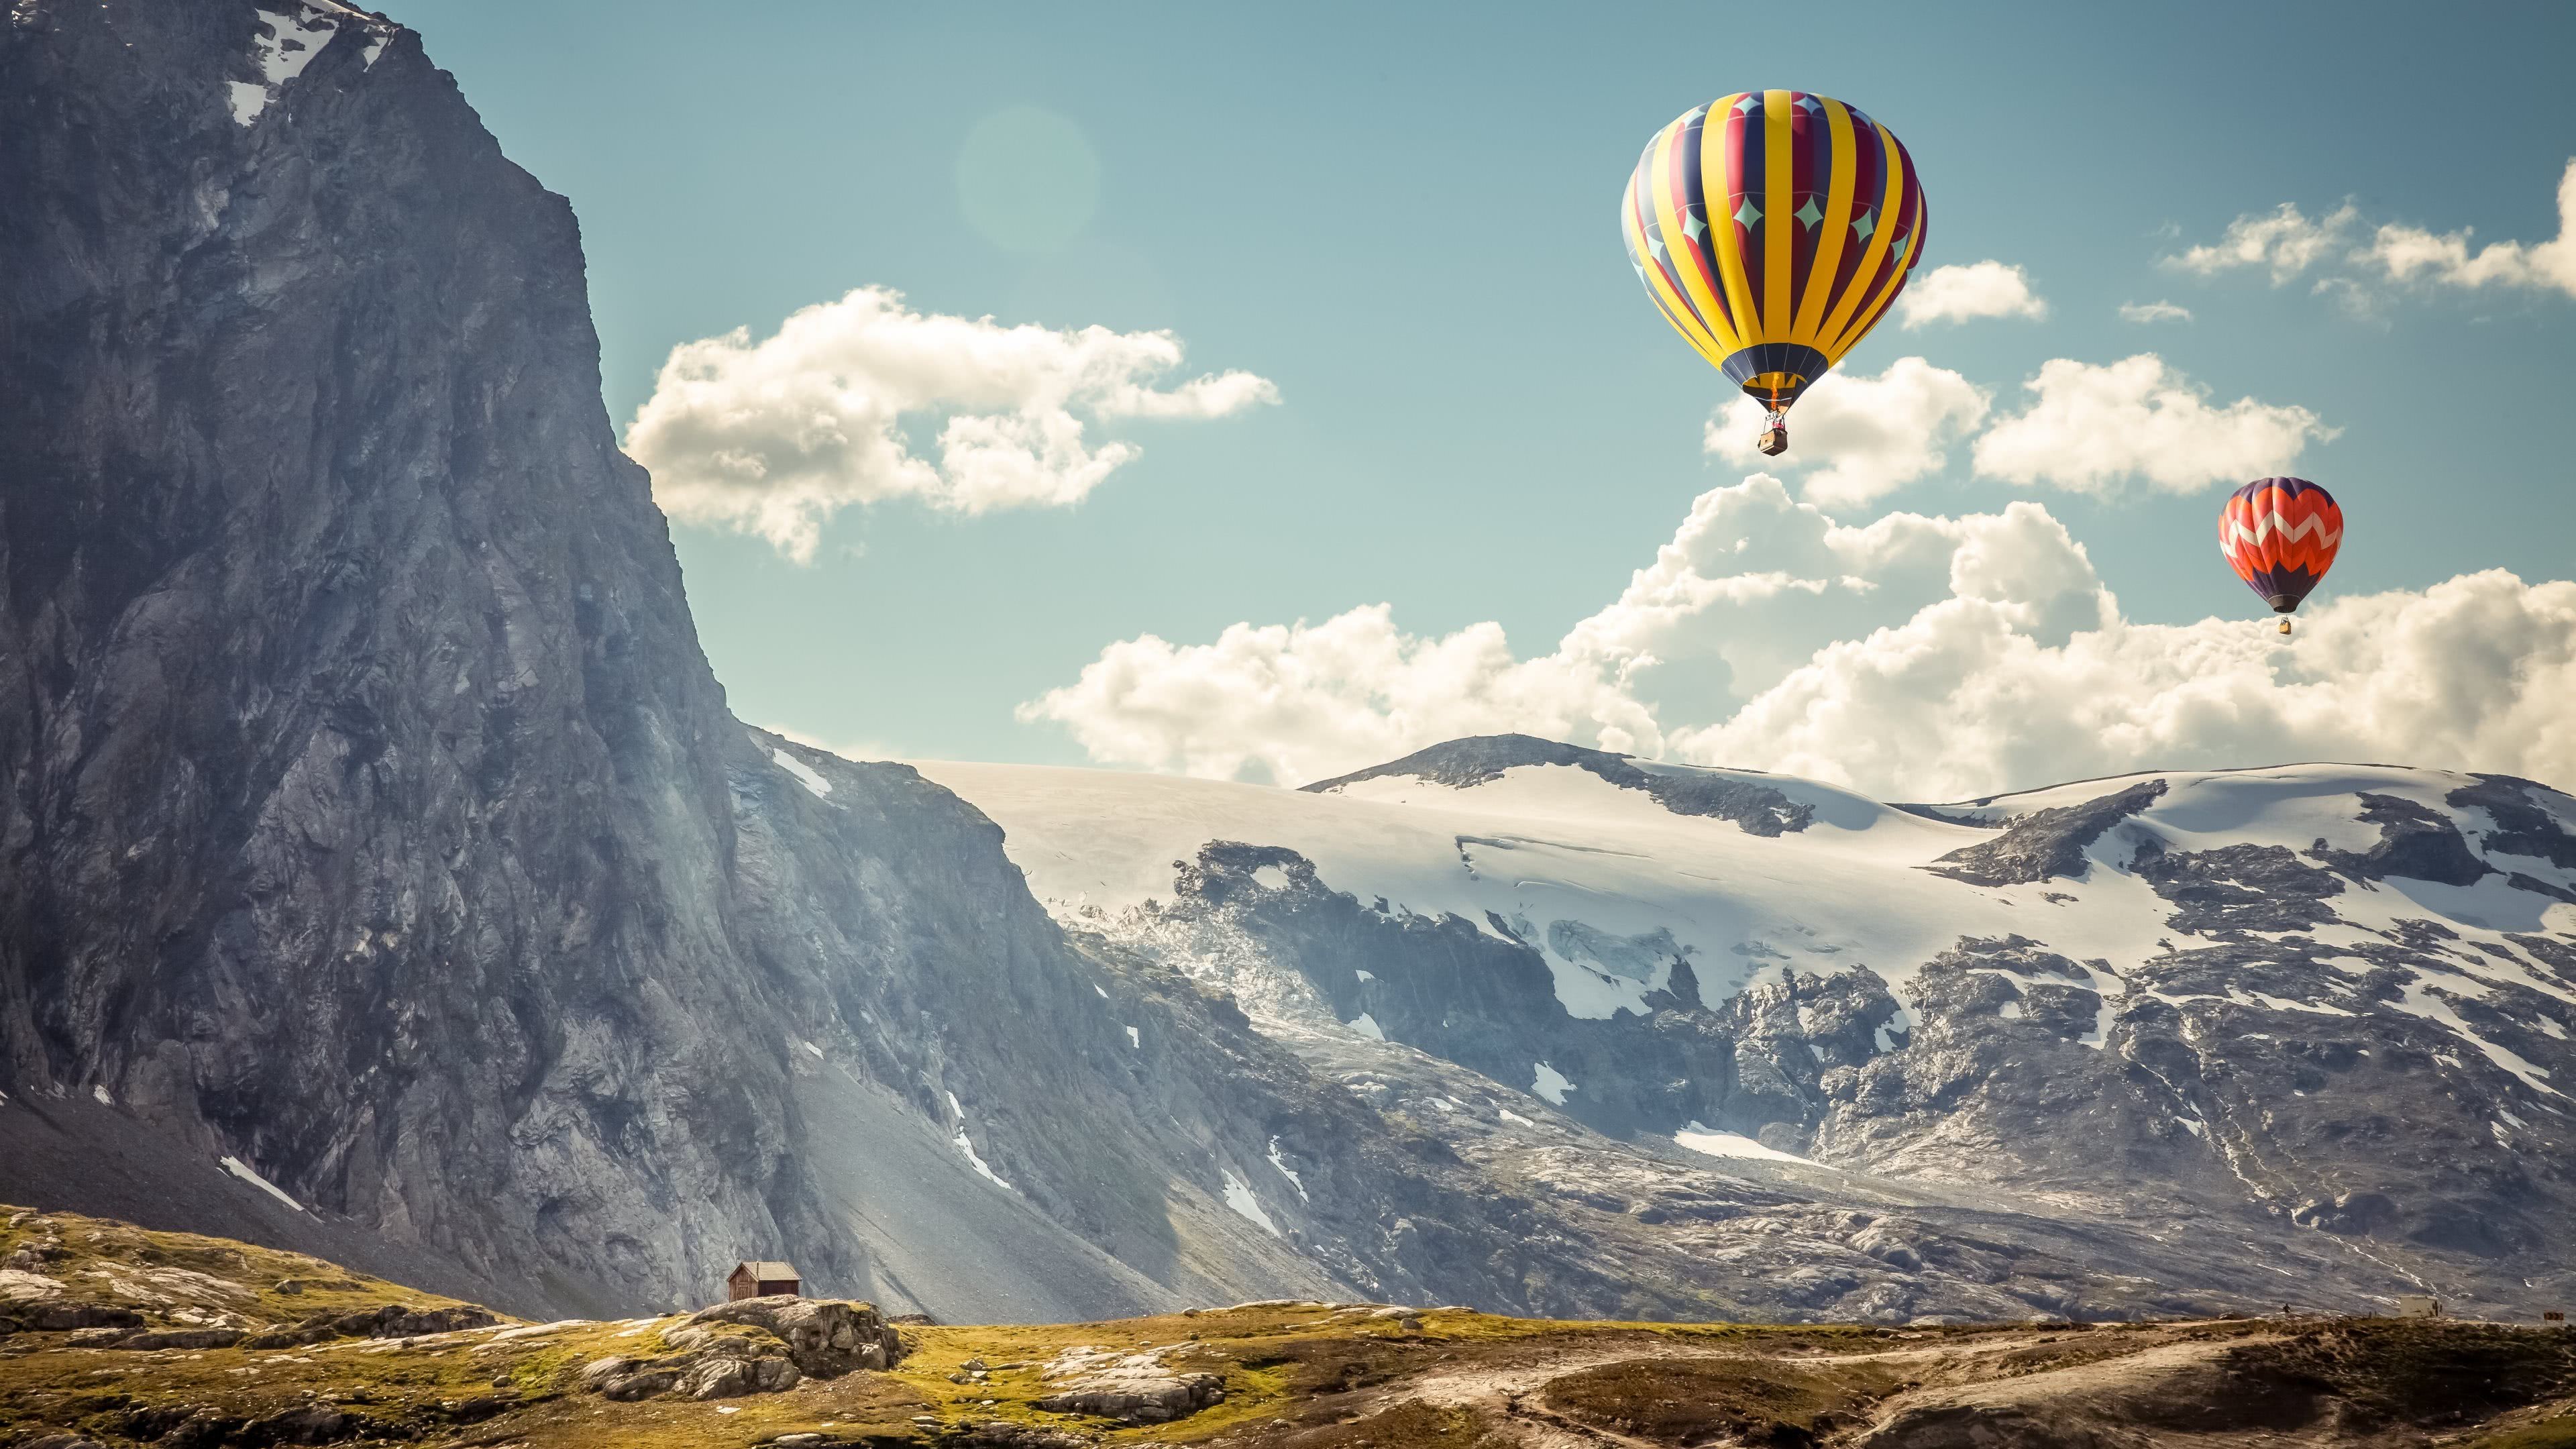 3840x2160 colorful hot air baloons with mountains uhd 4k wallpaper